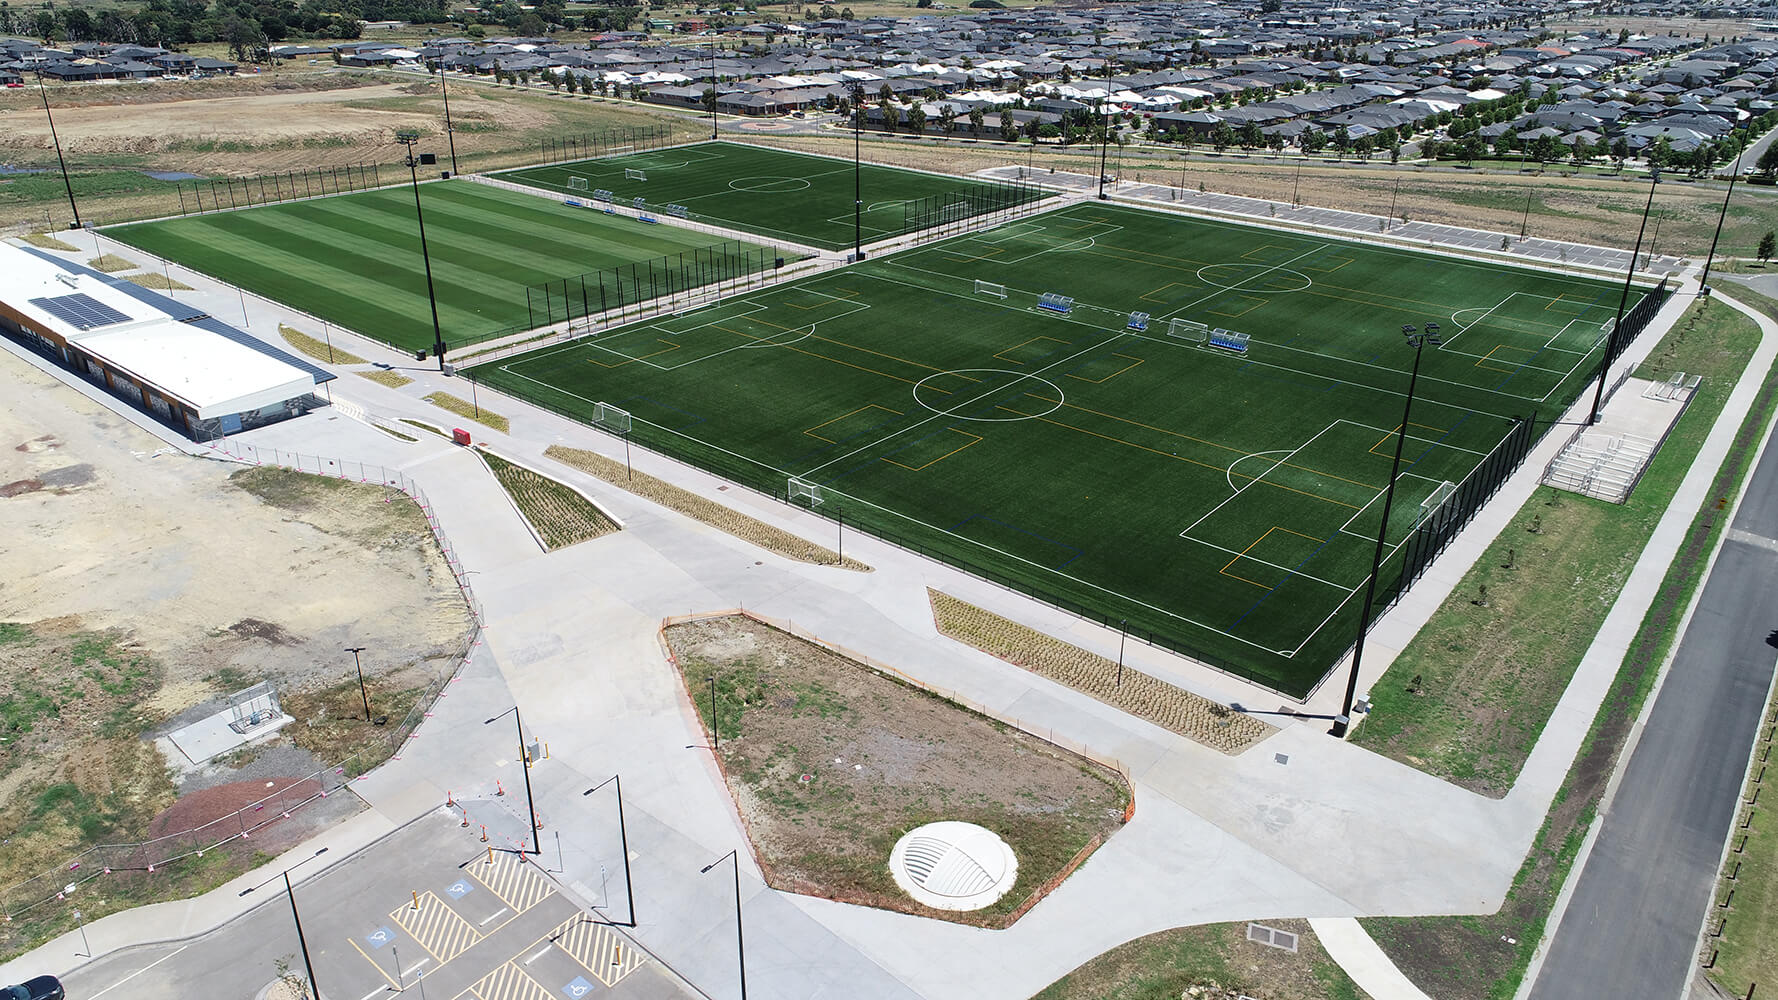 Aerial view of three FIFA Compliant synthetic turf pitches and an elite natural turf hybrid pitch surface in a suburban area